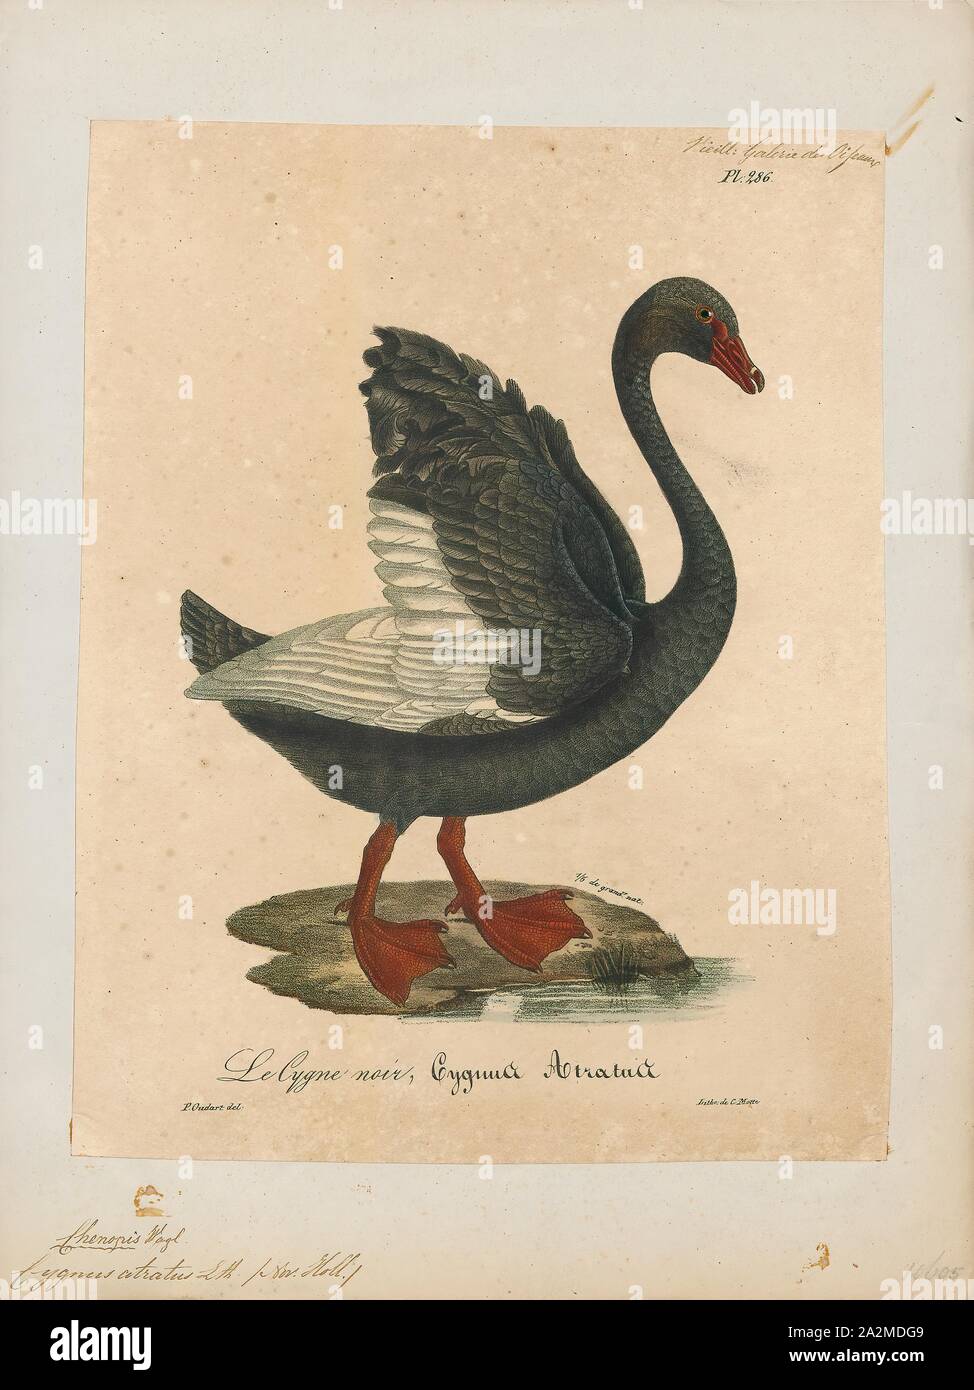 Cygnus atratus, Print, The black swan (Cygnus atratus) is large waterbird, a species of swan which mainly in the southeast and southwest regions of Australia. Within Australia they are nomadic,